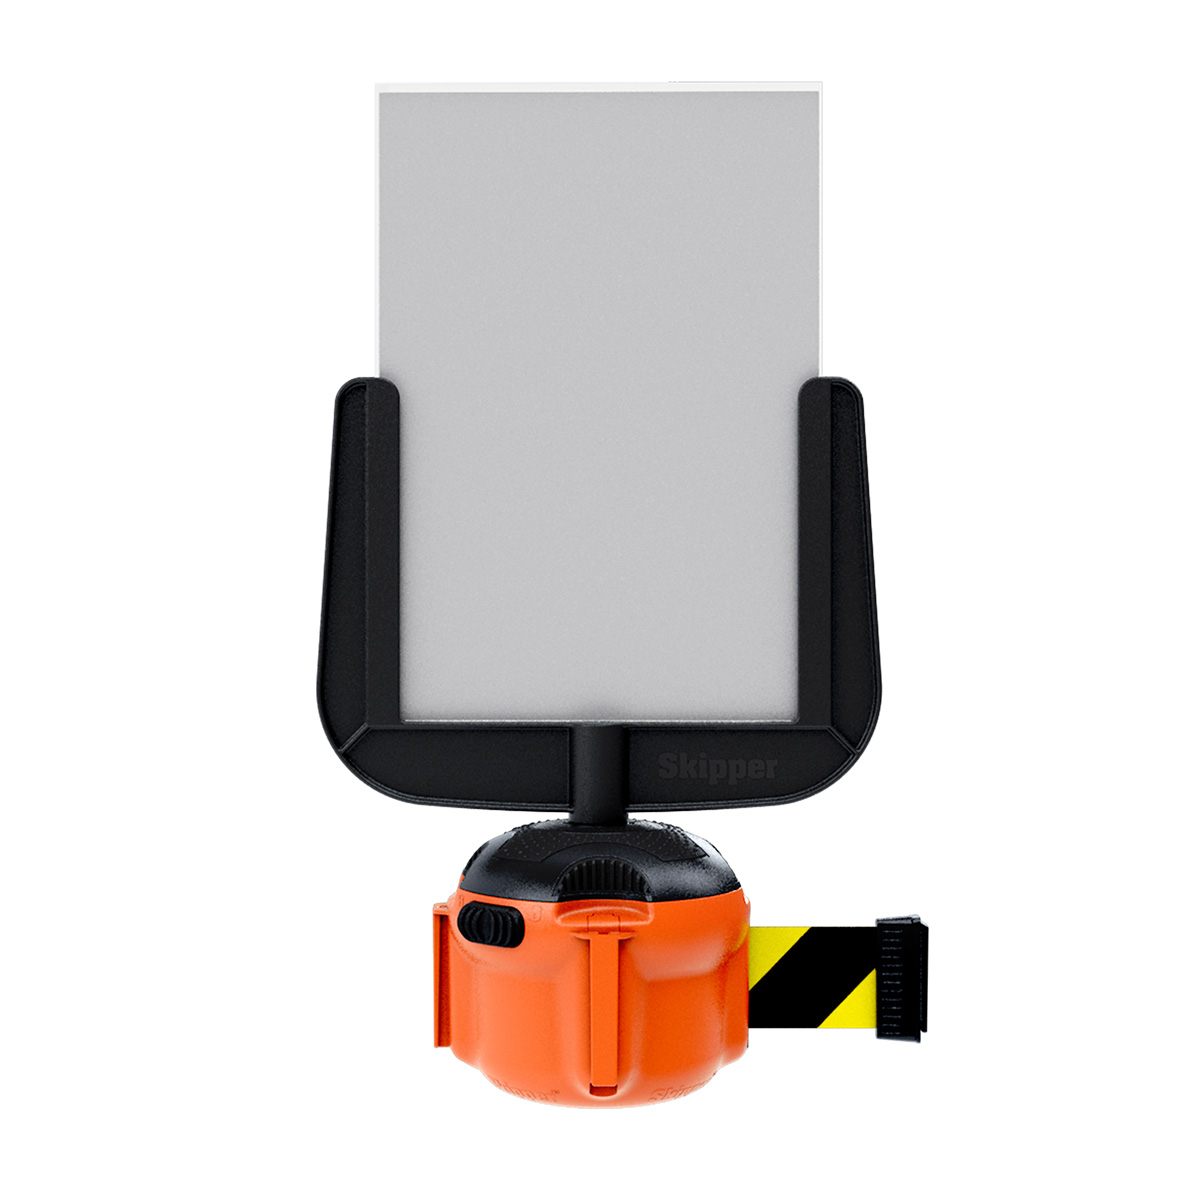 Skipper A4 Sign Holder Clips Directly onto the Top of The Skipper XS Barrier Case